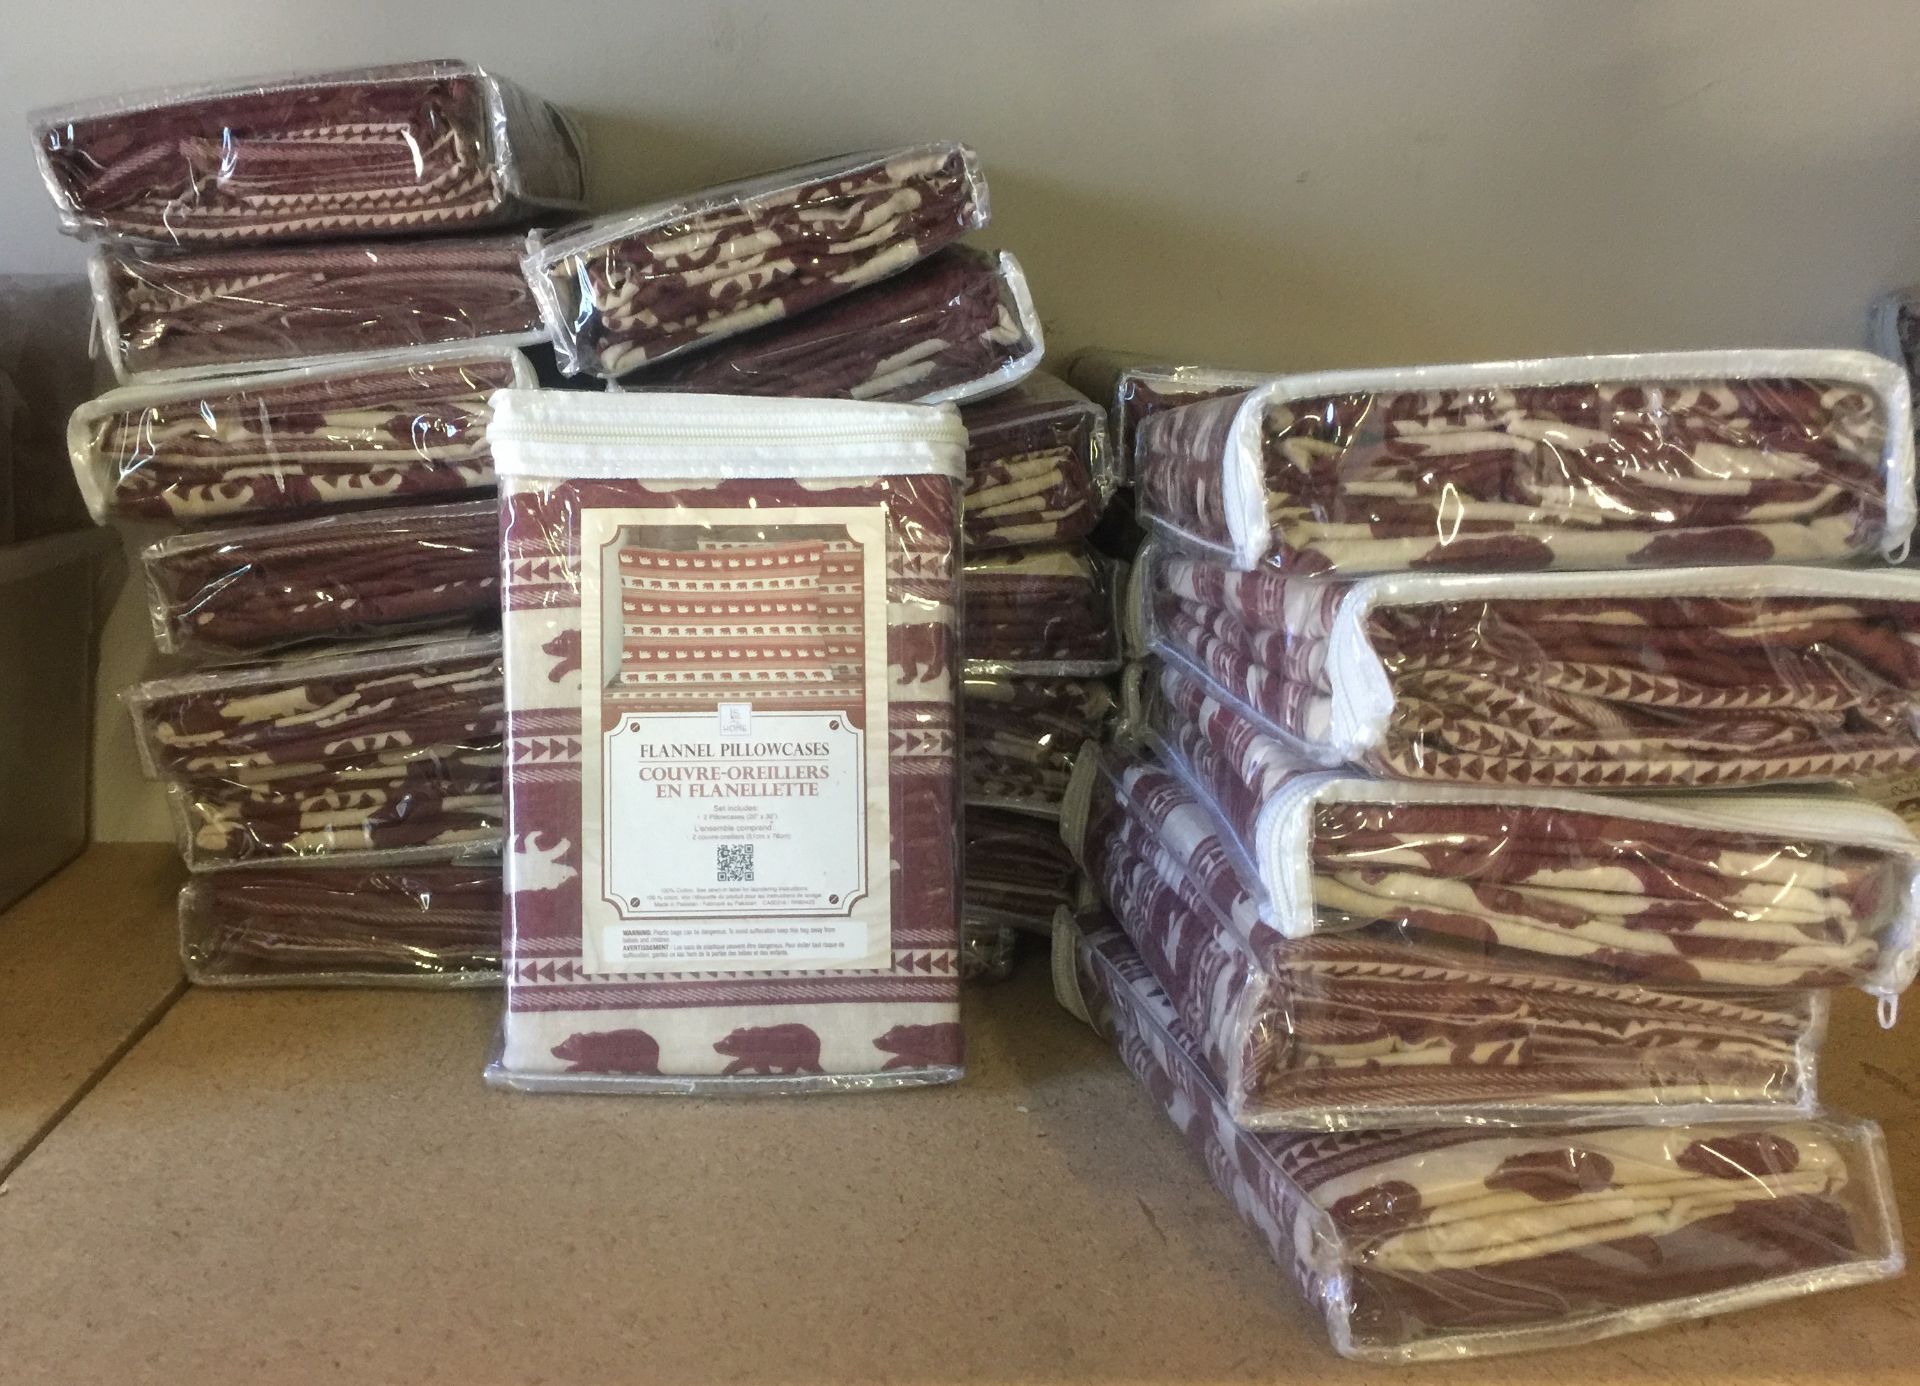 45 X FLANNEL PILLOW COVERS, POLLAR BEARS $39.99 RETAIL - Image 2 of 2